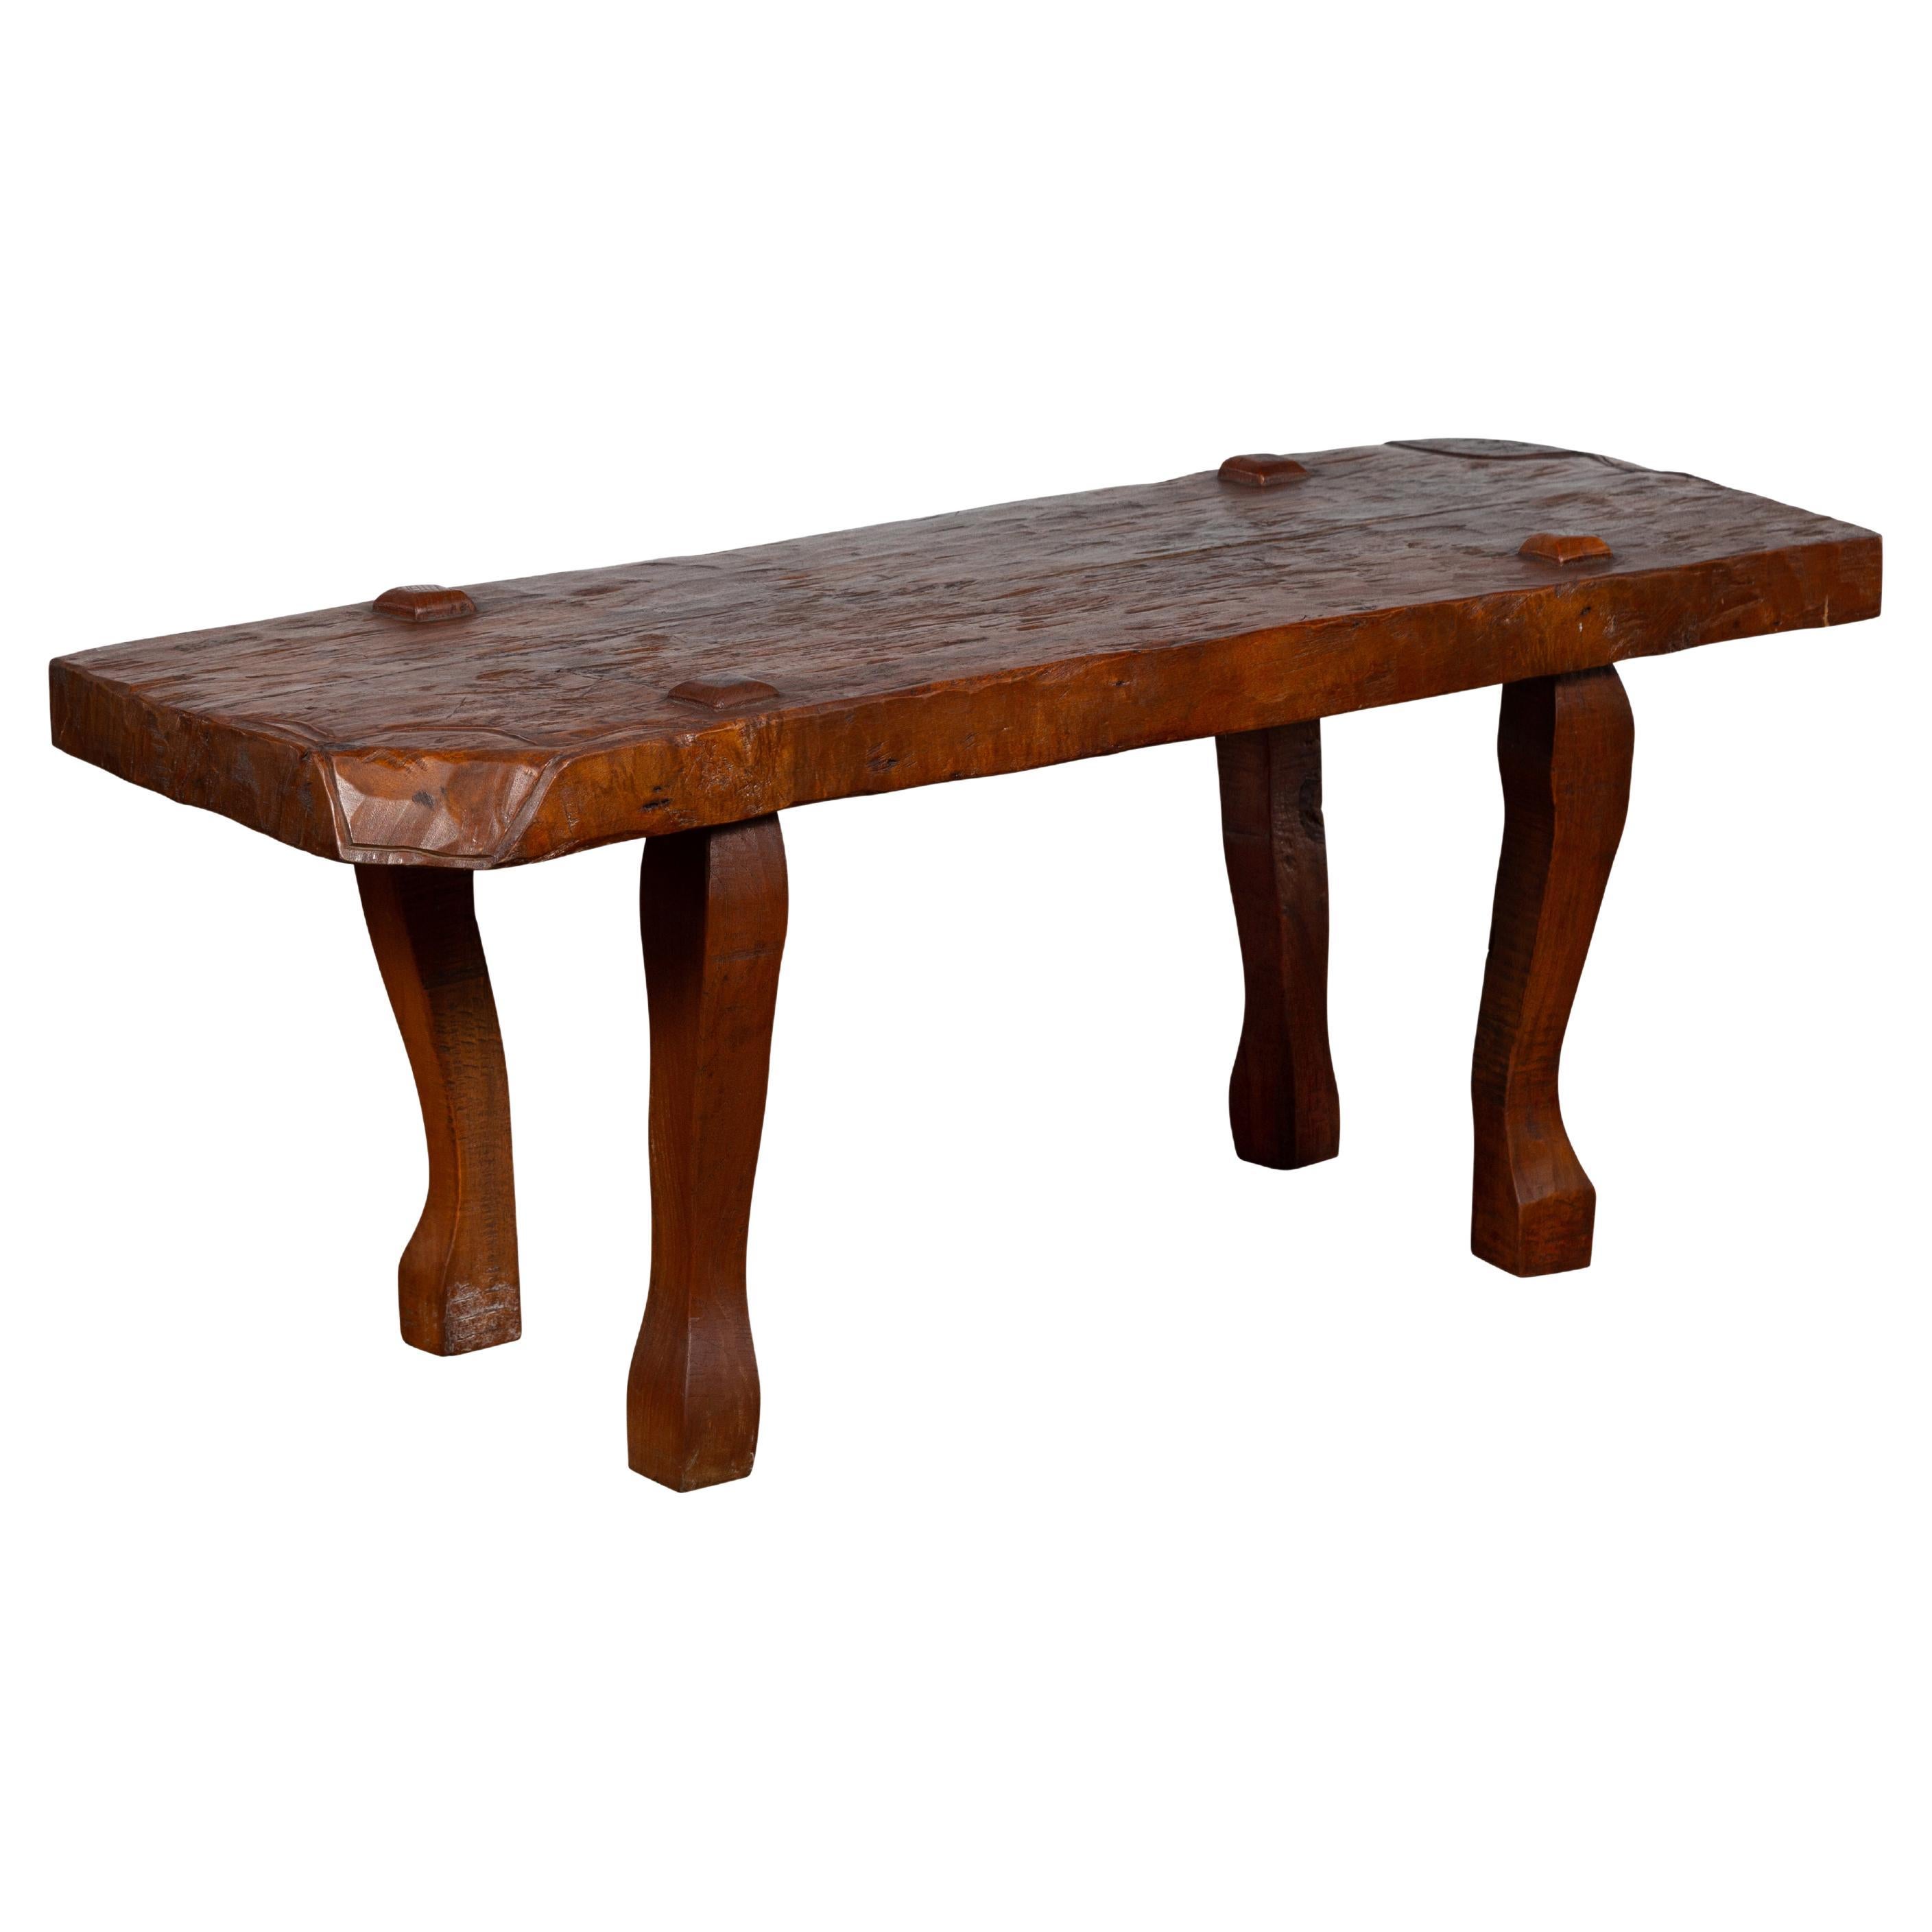 Javanese Arts & Crafts Teak Table with Recessed Legs and Distressed Appearance For Sale